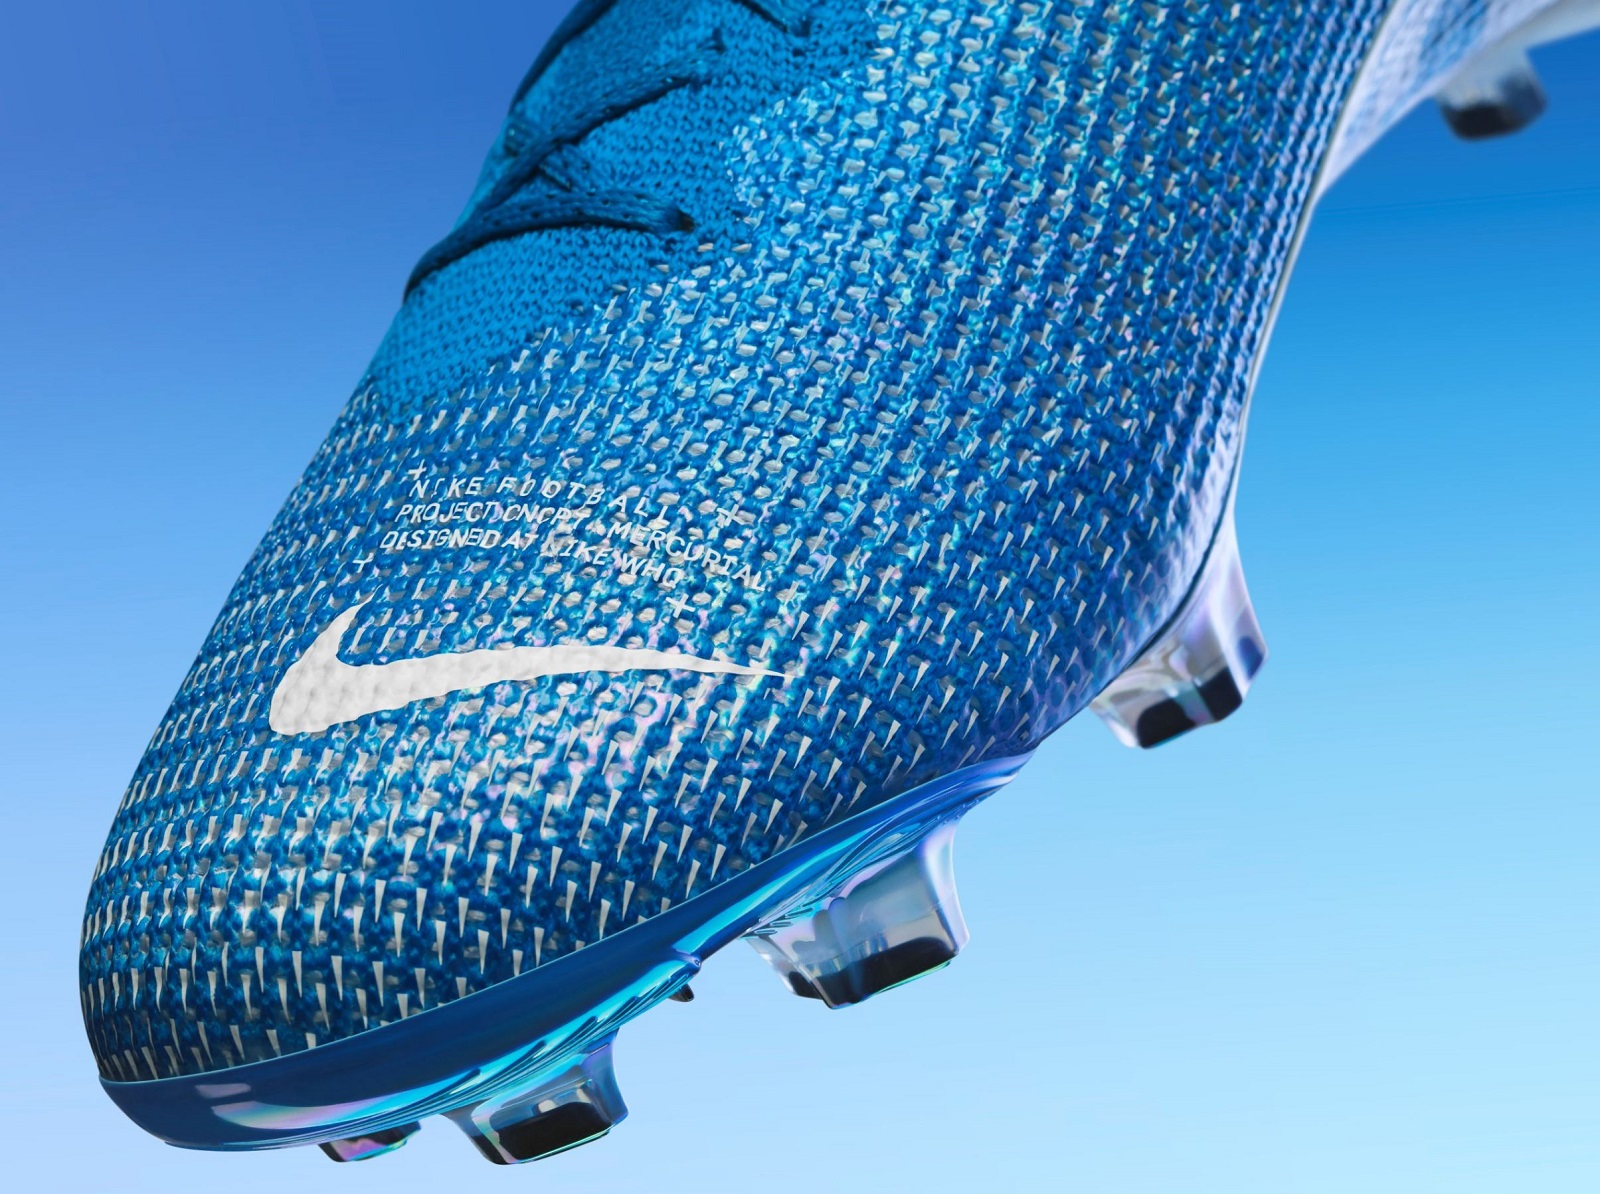 new nike cleats 2019